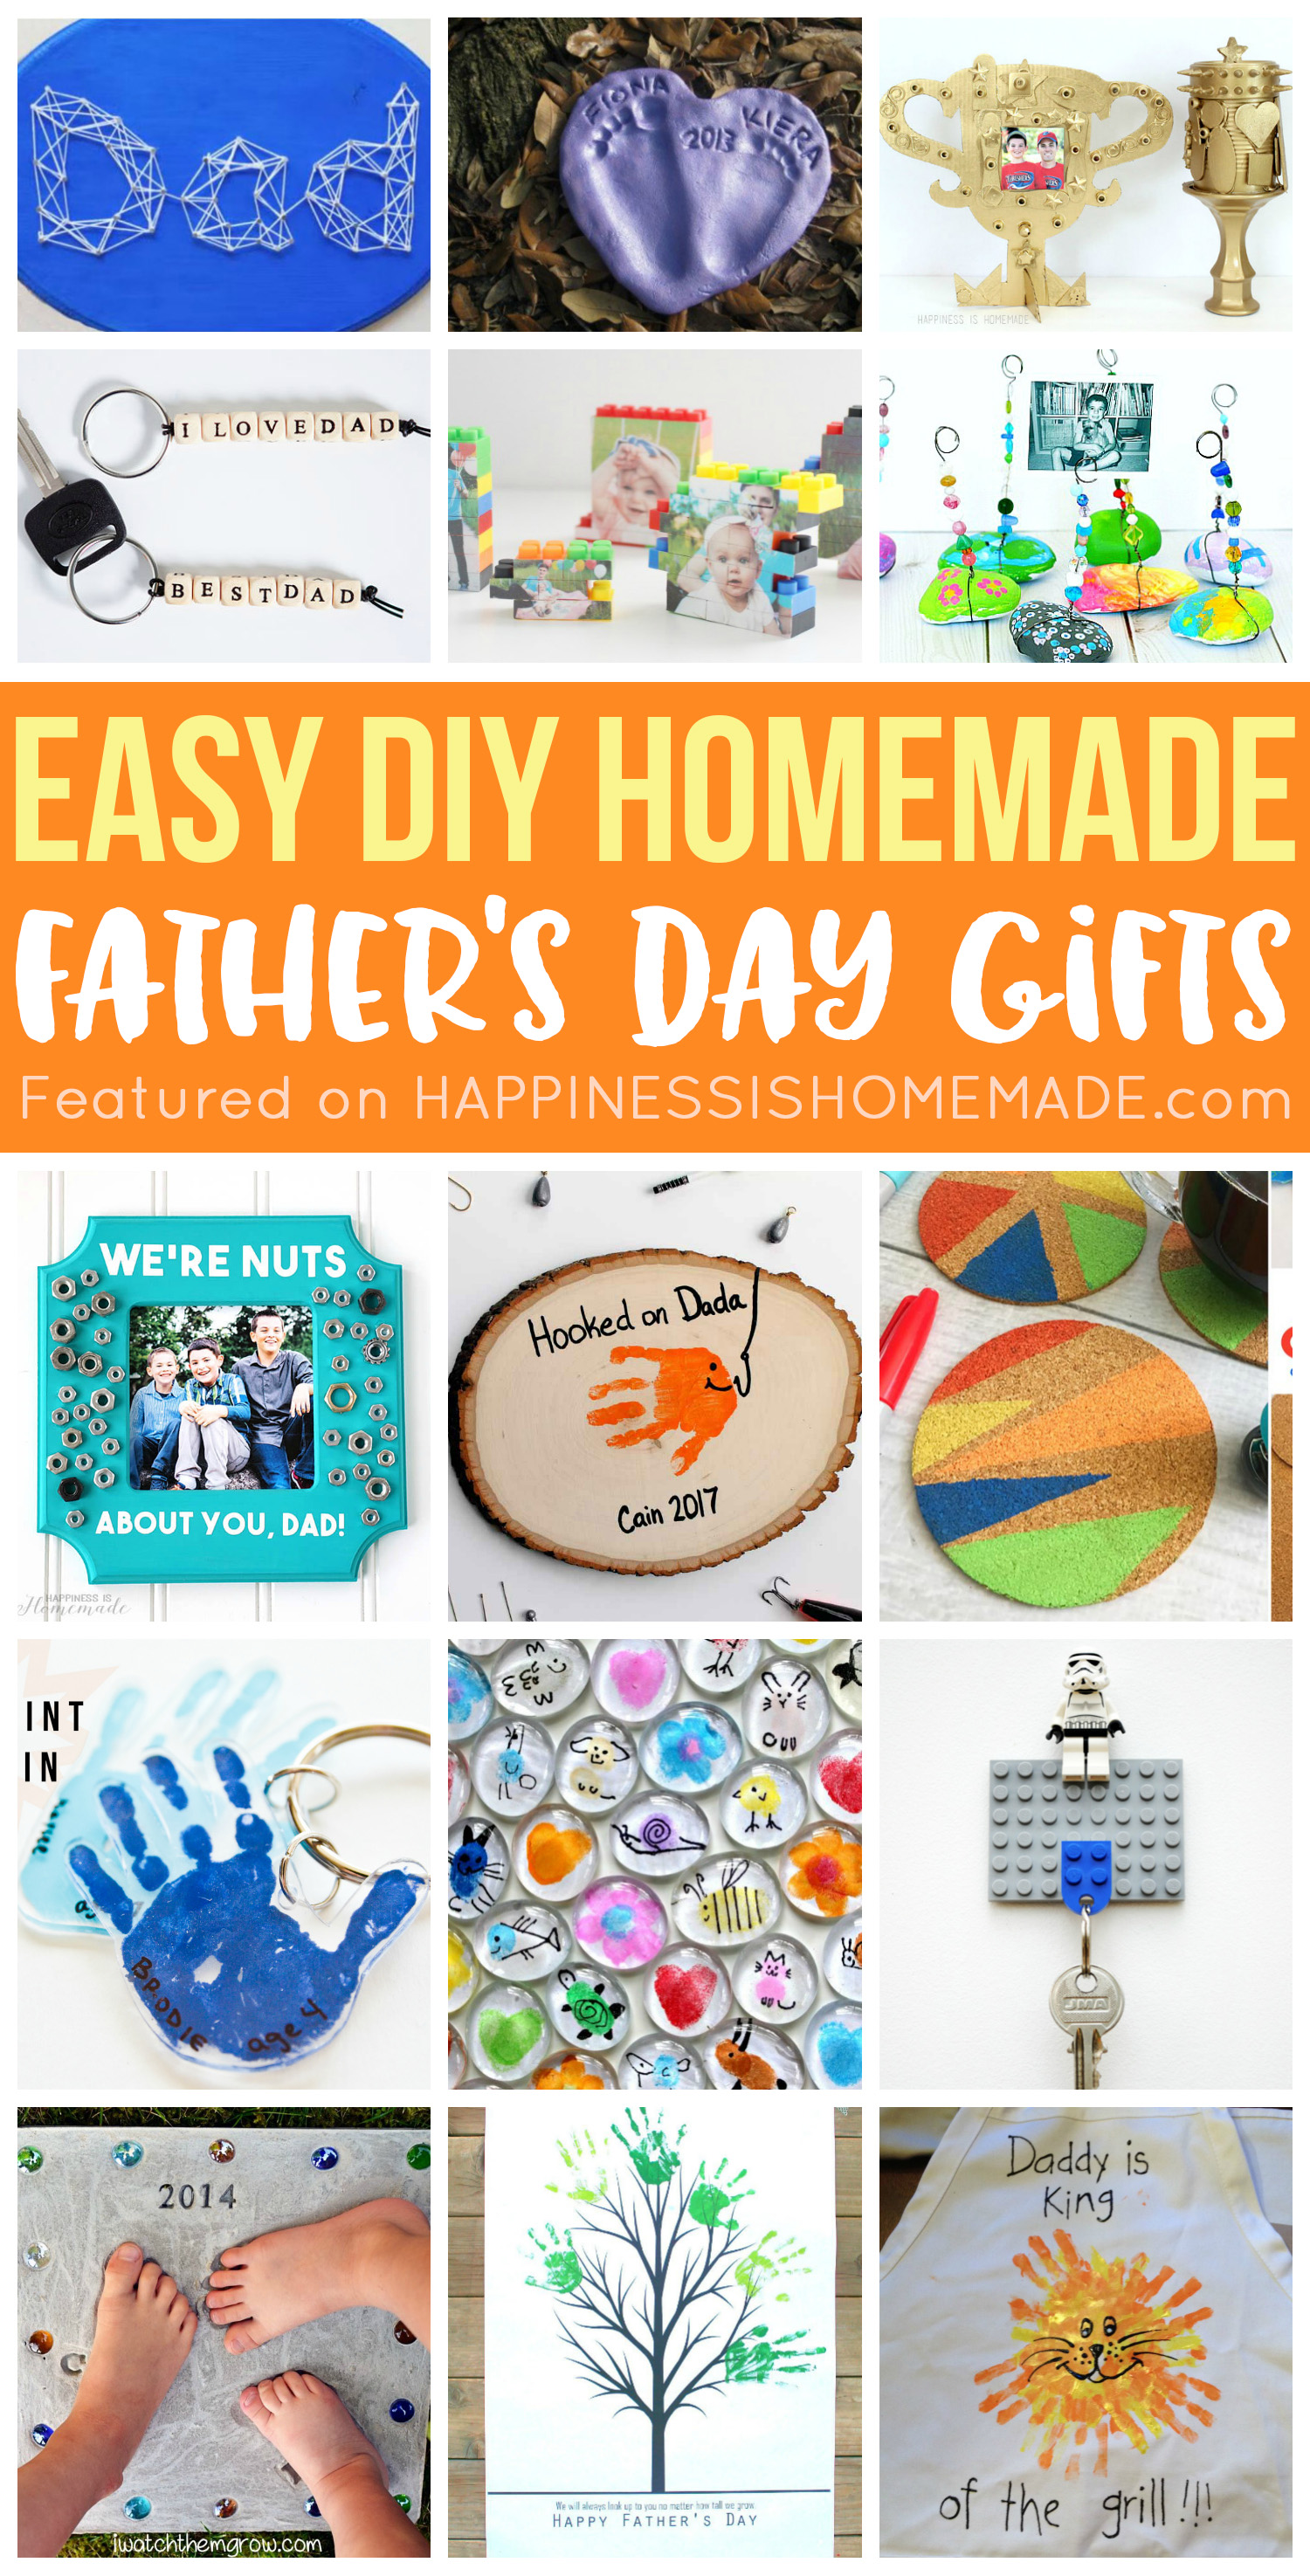 Homemade New Dad Gifts: handmade to show your special love!